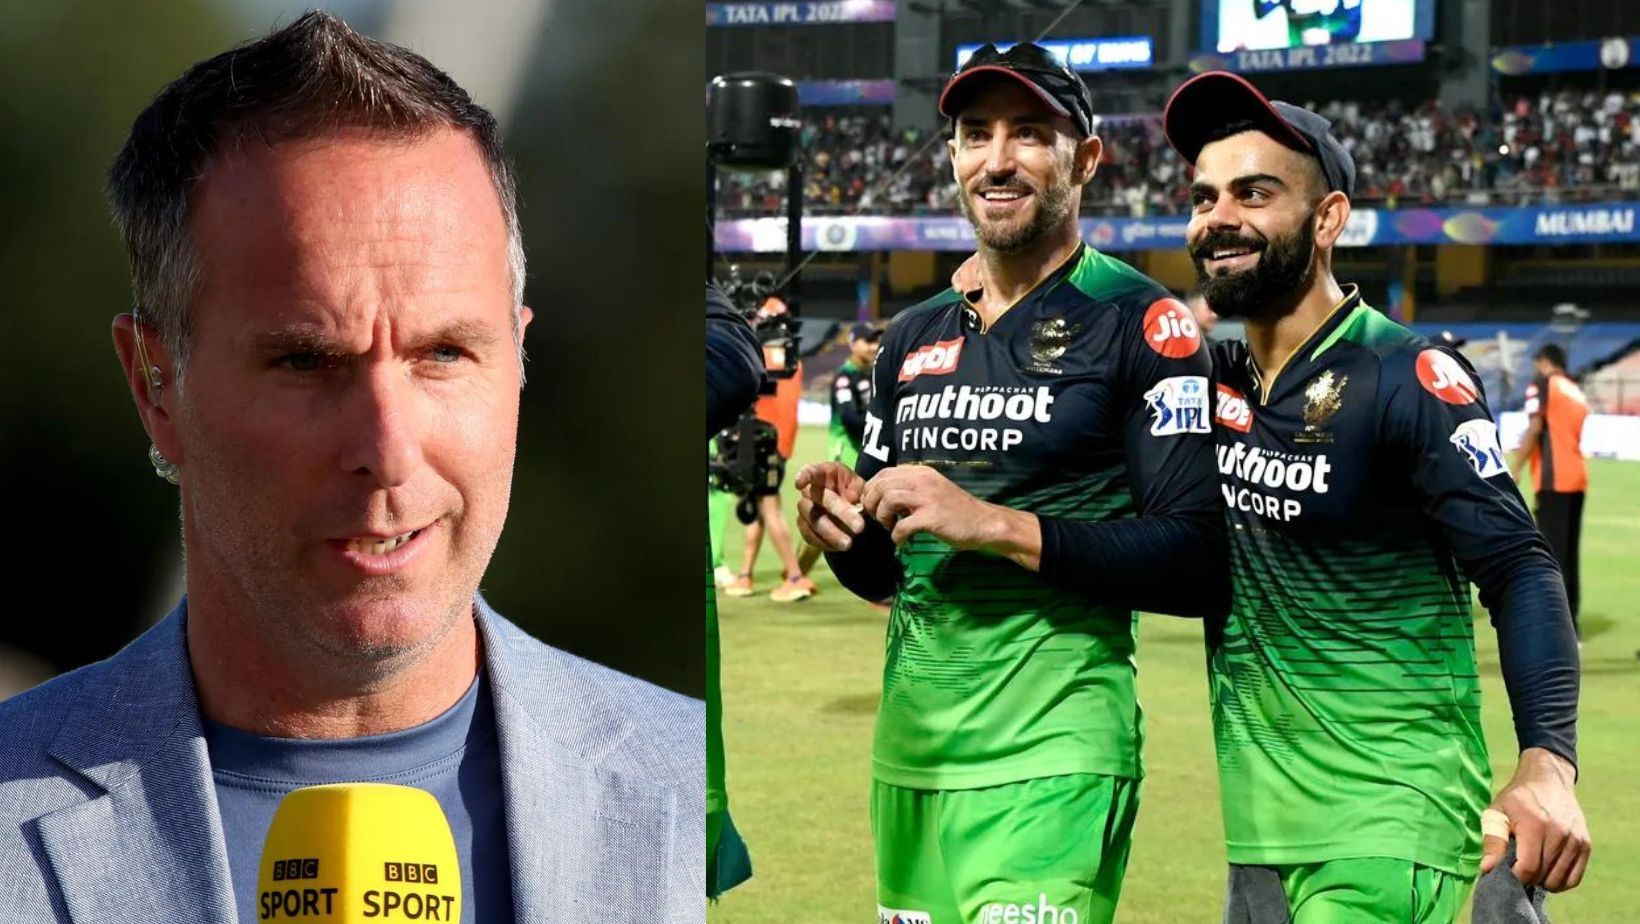 Michael Vaughan, Faf du Plessis, and Virat Kohli (from left to right).